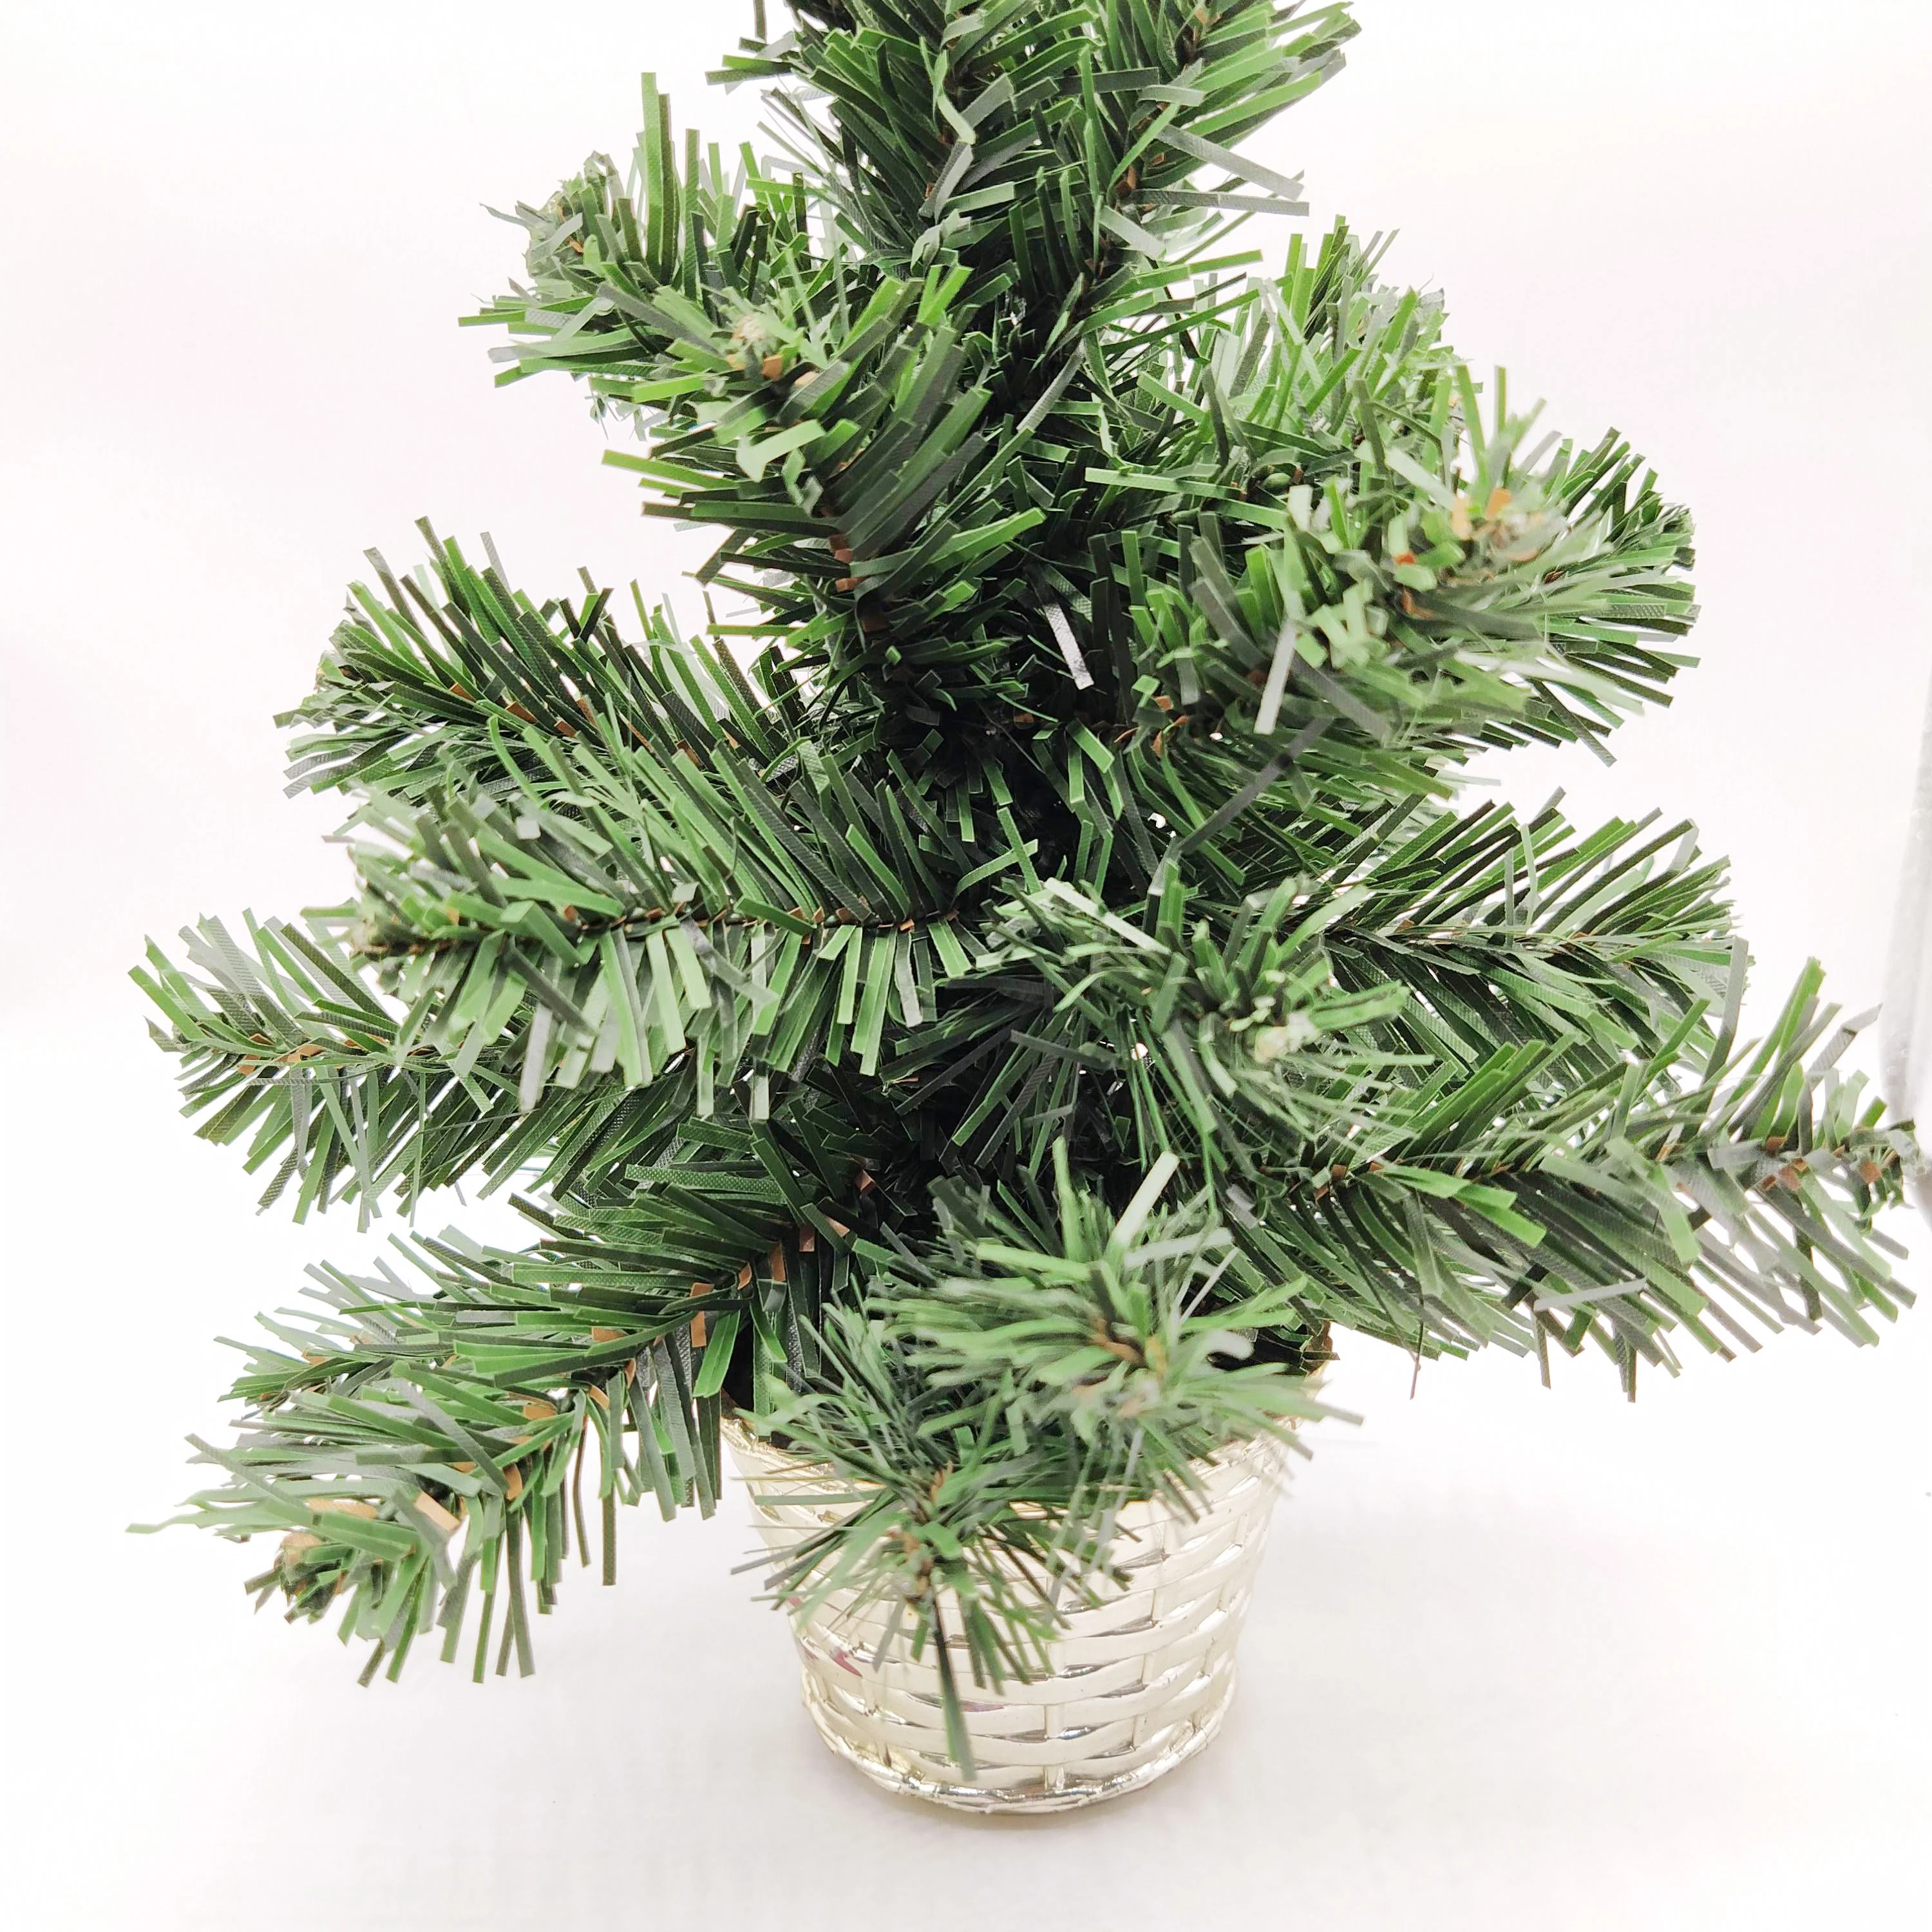 

30cm/40cm Mini Christmas Trees Xmas Decorations A Small Pine Tree Placed In The Desktop New Year Christmas Festival Ornaments